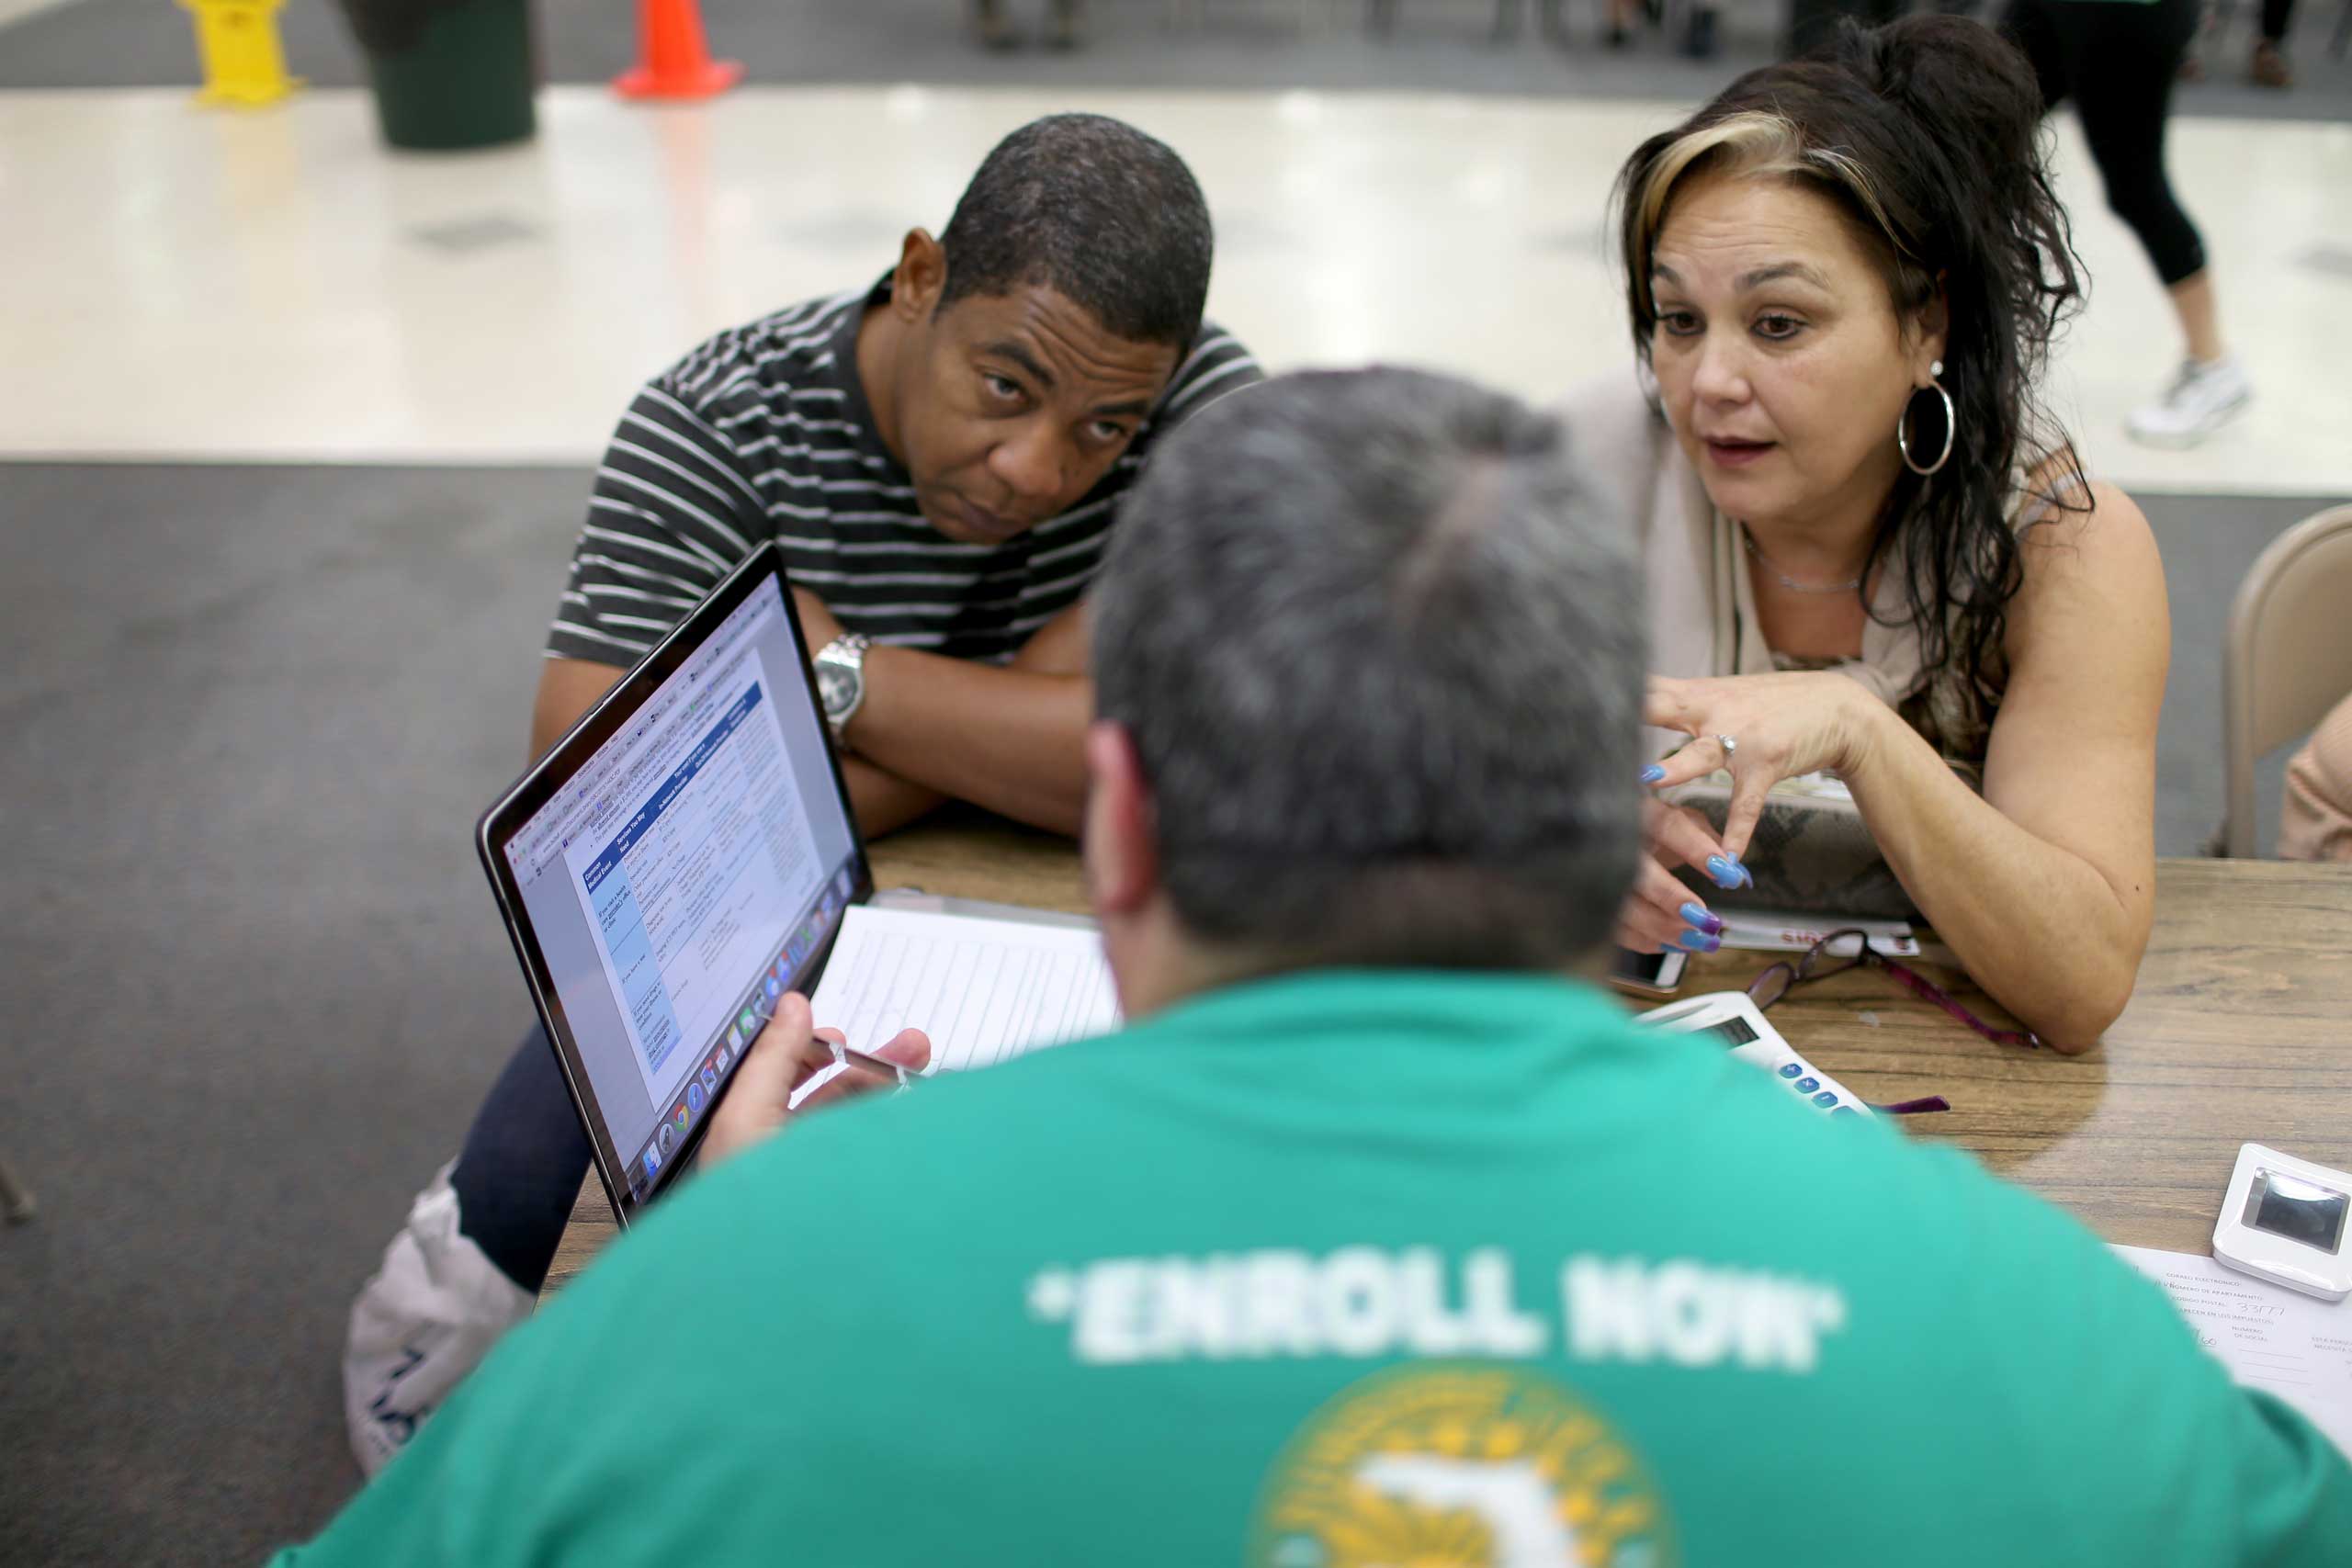 Jose Ramirez, left, and Mariana Silva speak with Yosmay Valdivia, an agent from Sunshine Life and Health Advisors, as they discuss plans available from the Affordable Care Act in the Mall of the Americas on Dec. 15, 2014 in Miami. (Joe Raedle—Getty Images)